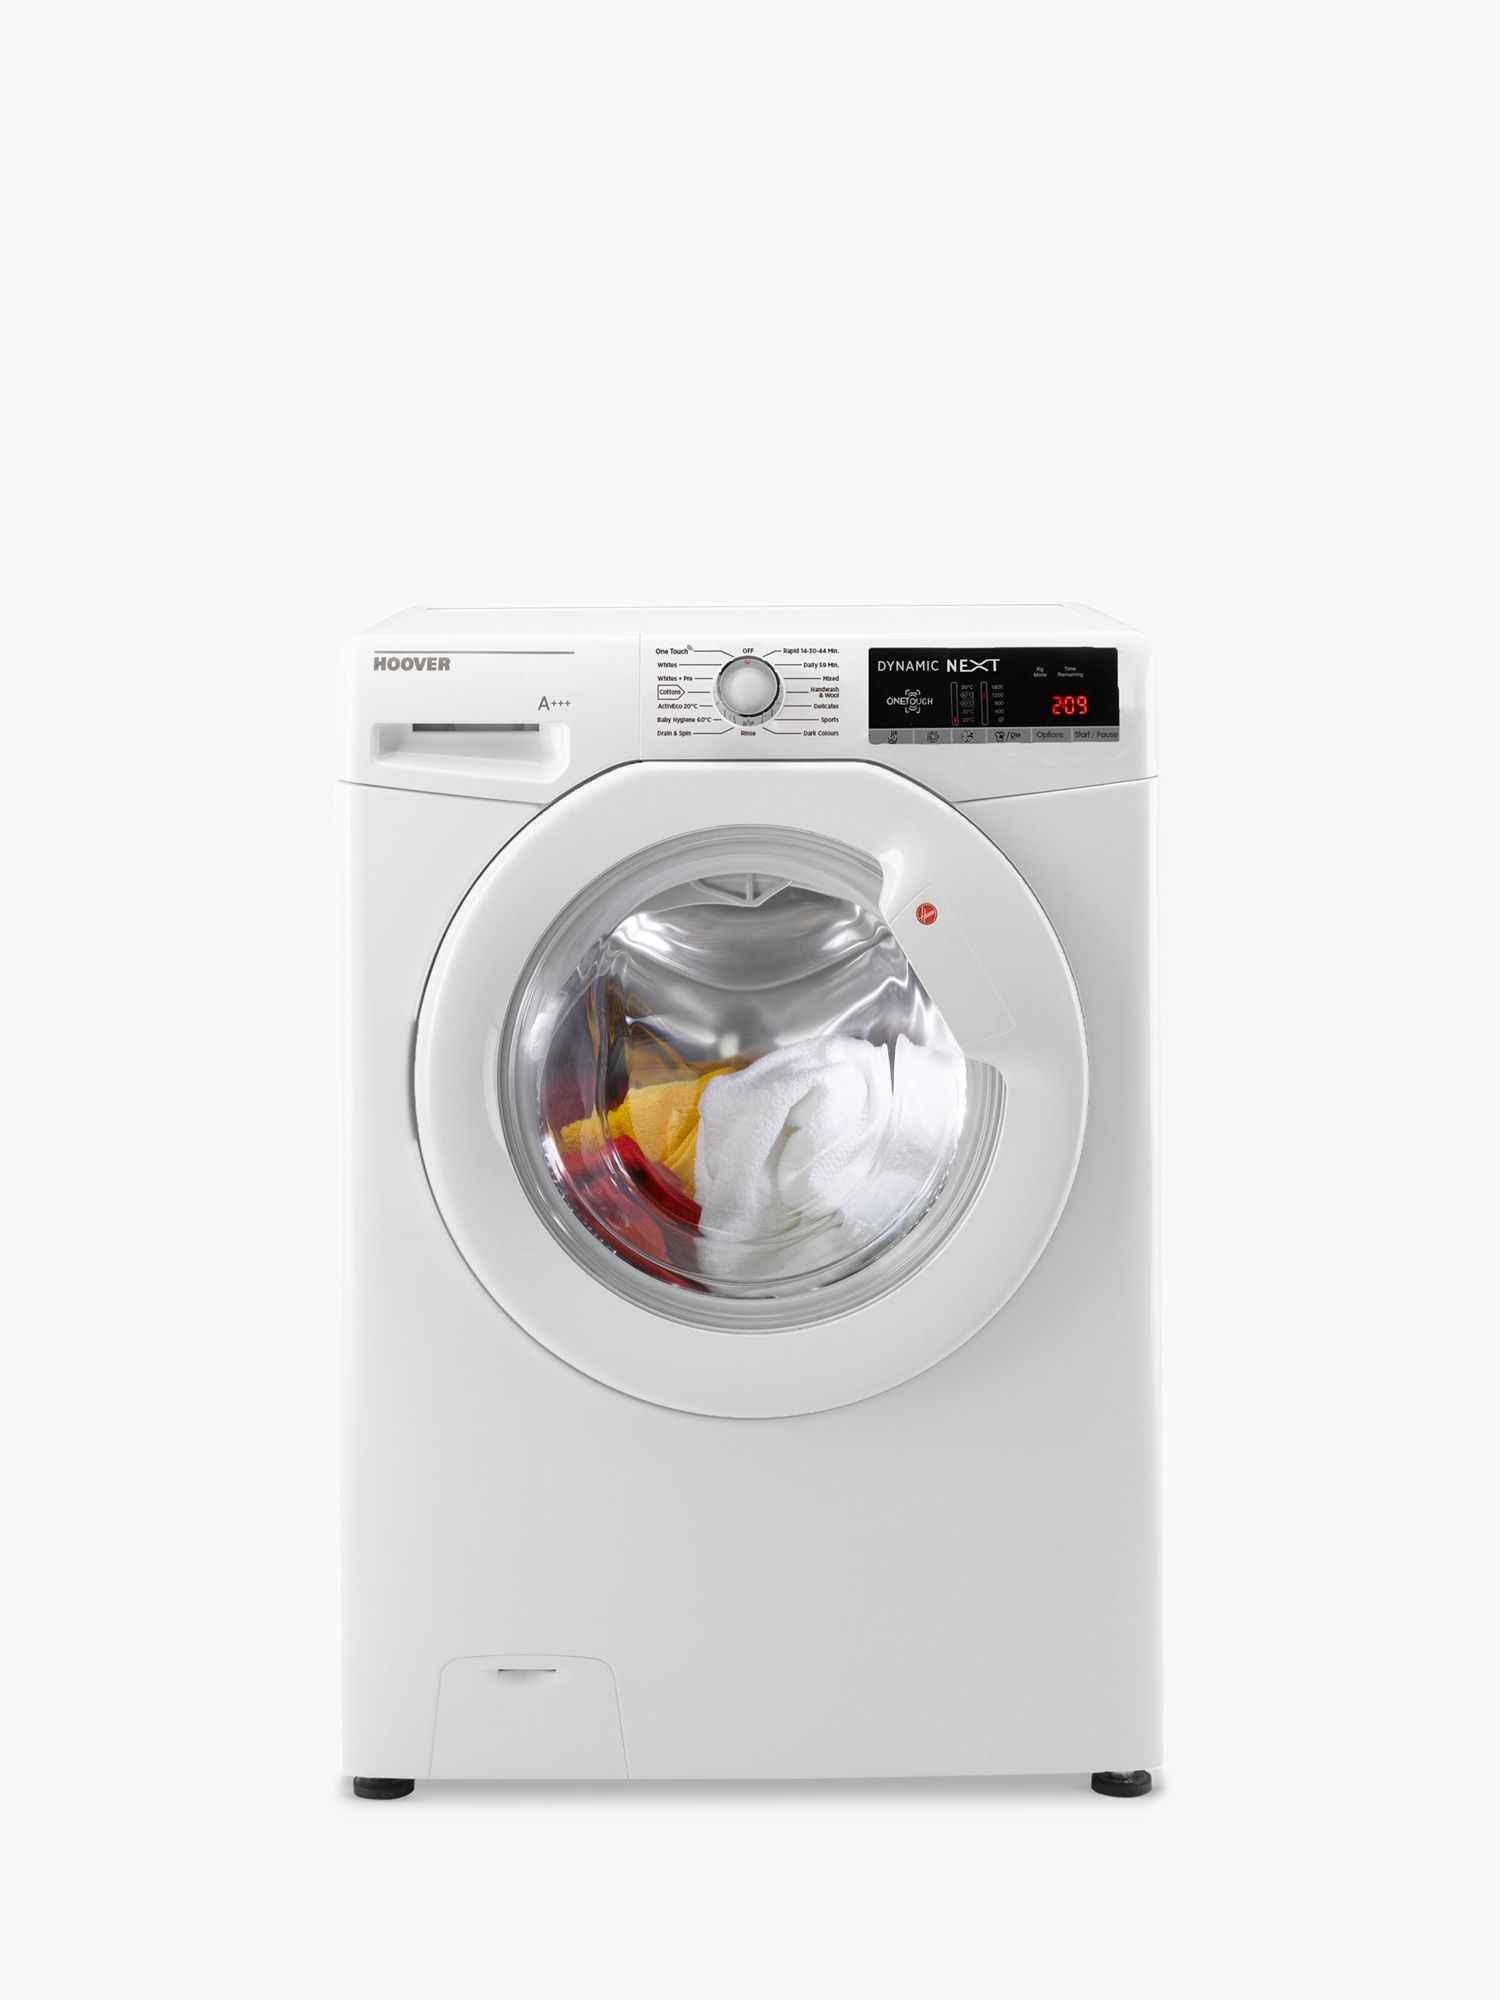 Hoover DXOA69L Washing Machine, 9kg, 1600rpm, A+++ Energy Rating